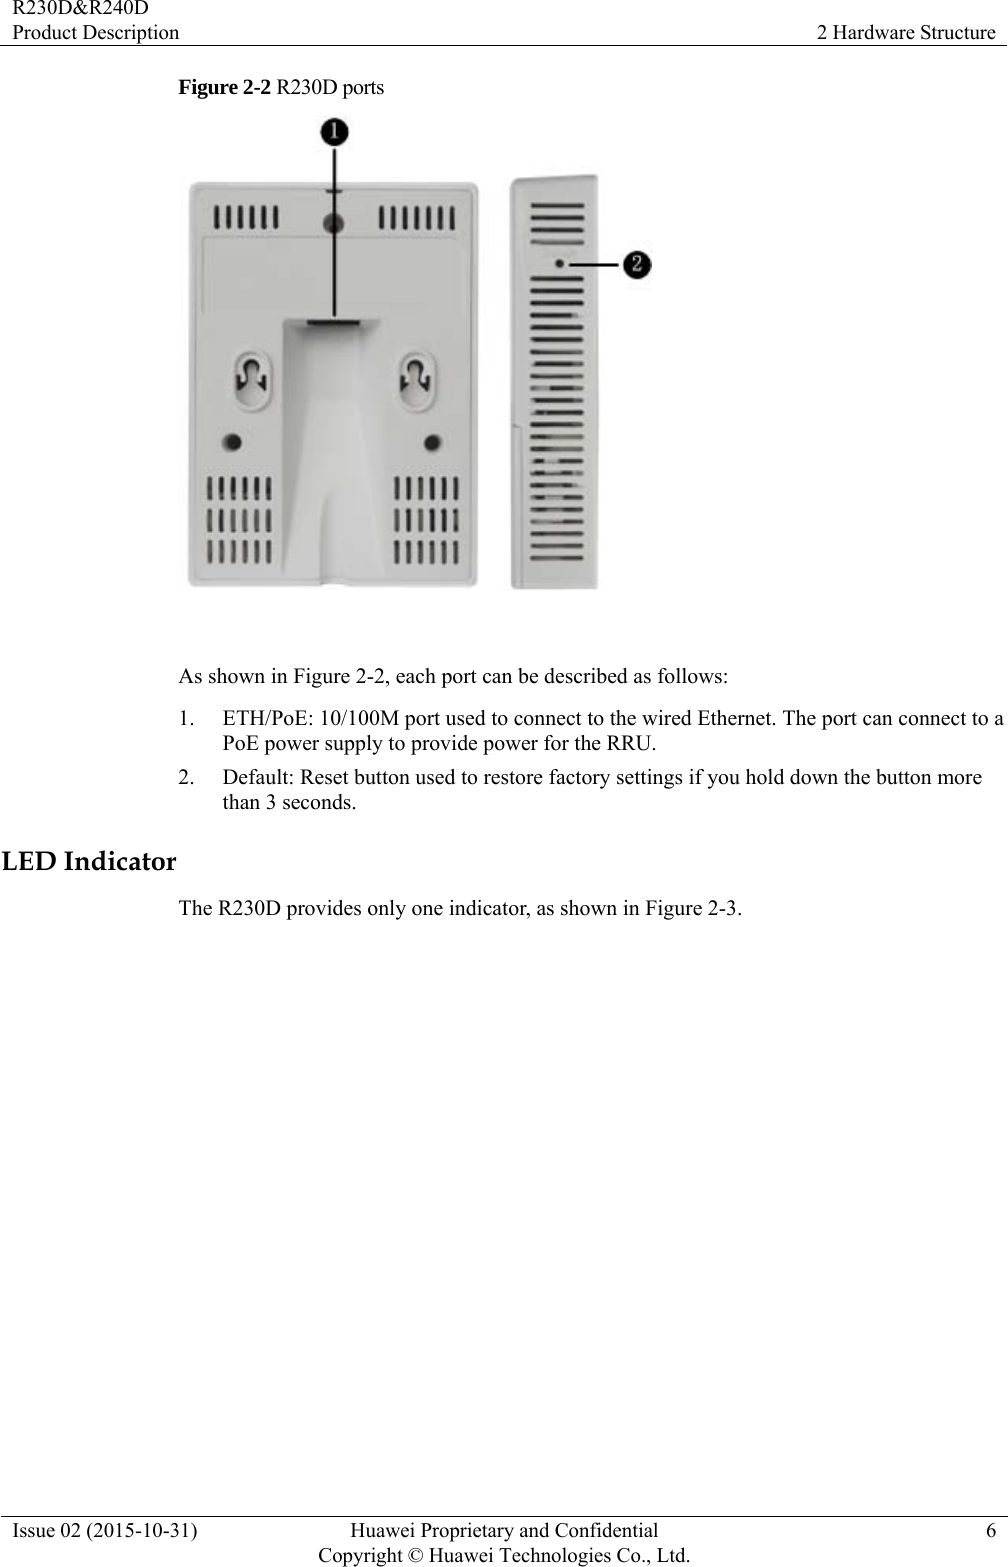 R230D&amp;R240D Product Description  2 Hardware Structure Issue 02 (2015-10-31)  Huawei Proprietary and Confidential         Copyright © Huawei Technologies Co., Ltd.6 Figure 2-2 R230D ports   As shown in Figure 2-2, each port can be described as follows: 1. ETH/PoE: 10/100M port used to connect to the wired Ethernet. The port can connect to a PoE power supply to provide power for the RRU. 2. Default: Reset button used to restore factory settings if you hold down the button more than 3 seconds. LED Indicator The R230D provides only one indicator, as shown in Figure 2-3. 